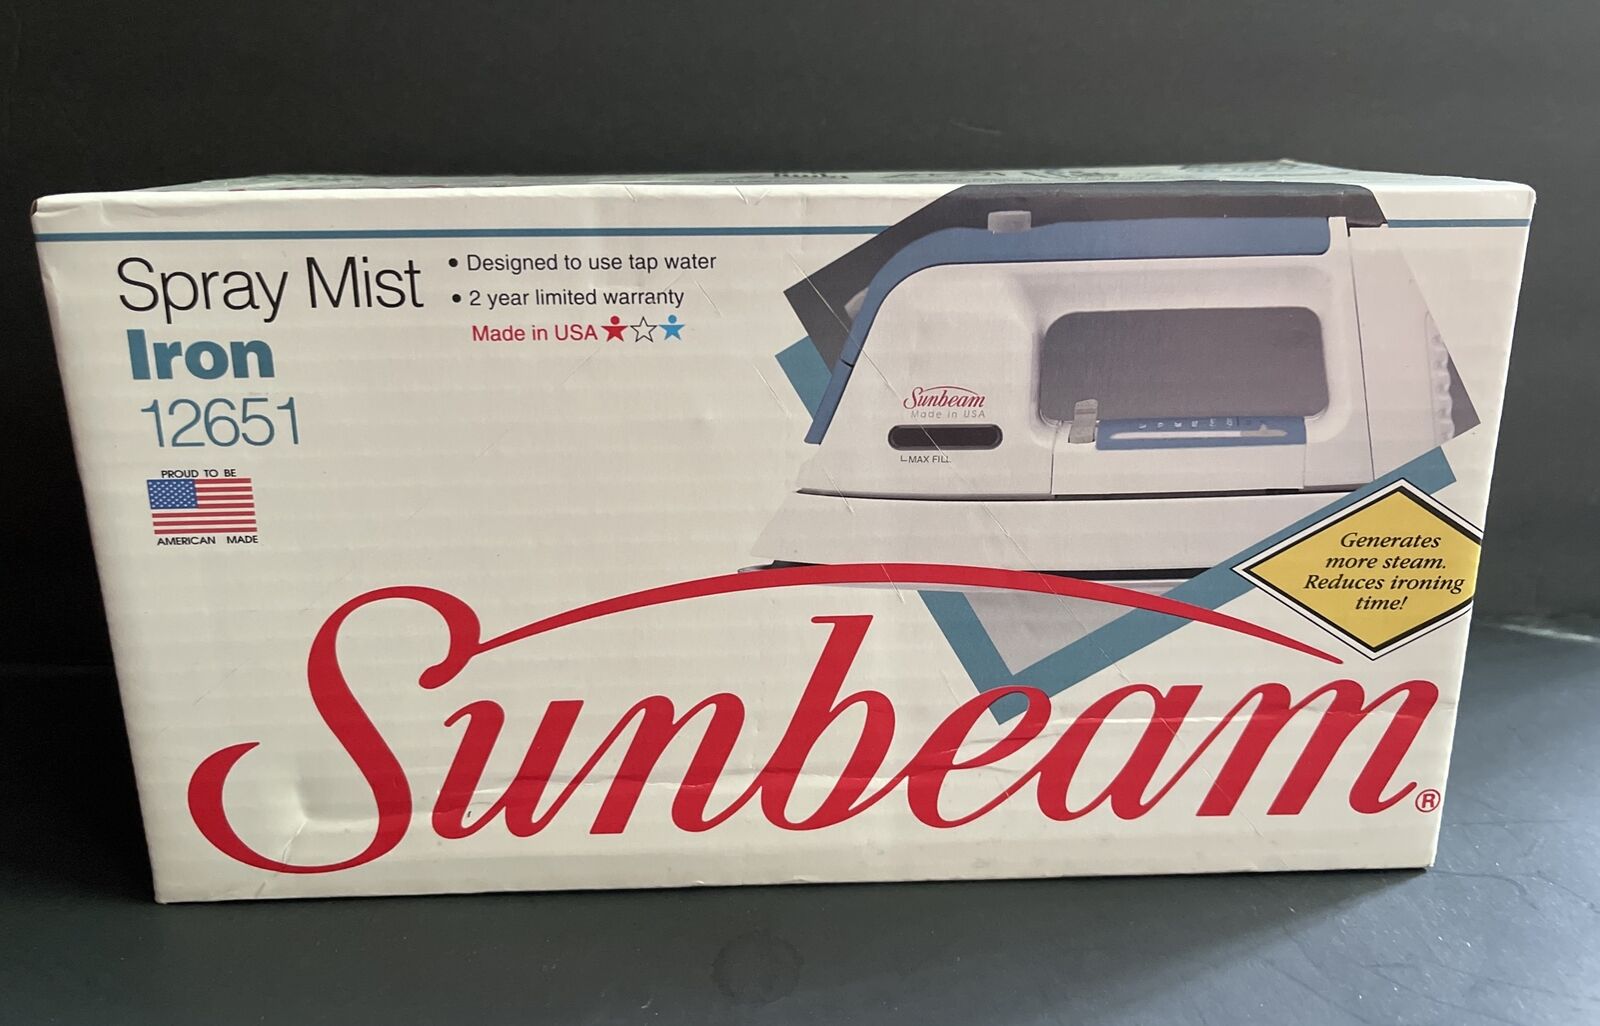 Vintage Sunbeam Spray Mist Iron Designed To Use Tap Water # 12651 Made In USA